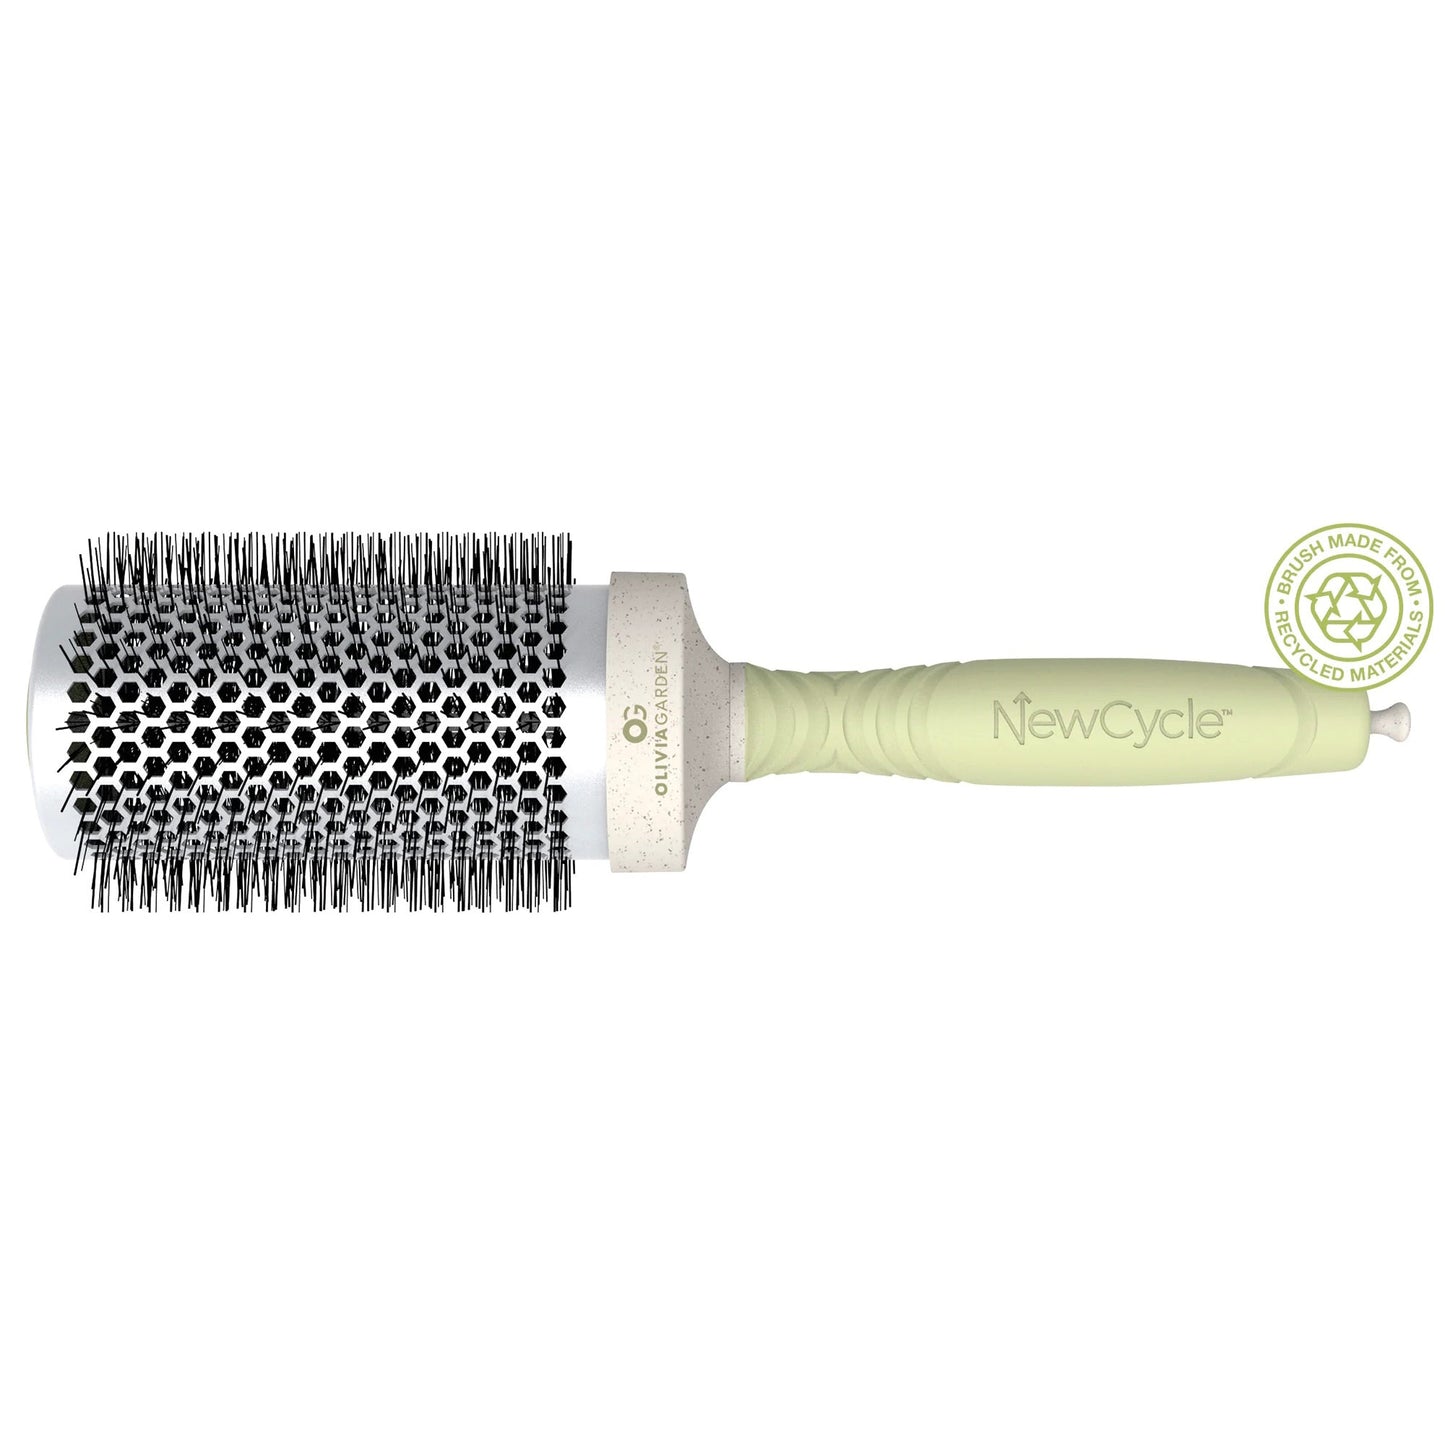 NC-T55 | 2 1/8" | NewCycle Thermal Brushes | OLIVIA GARDEN - SH Salons